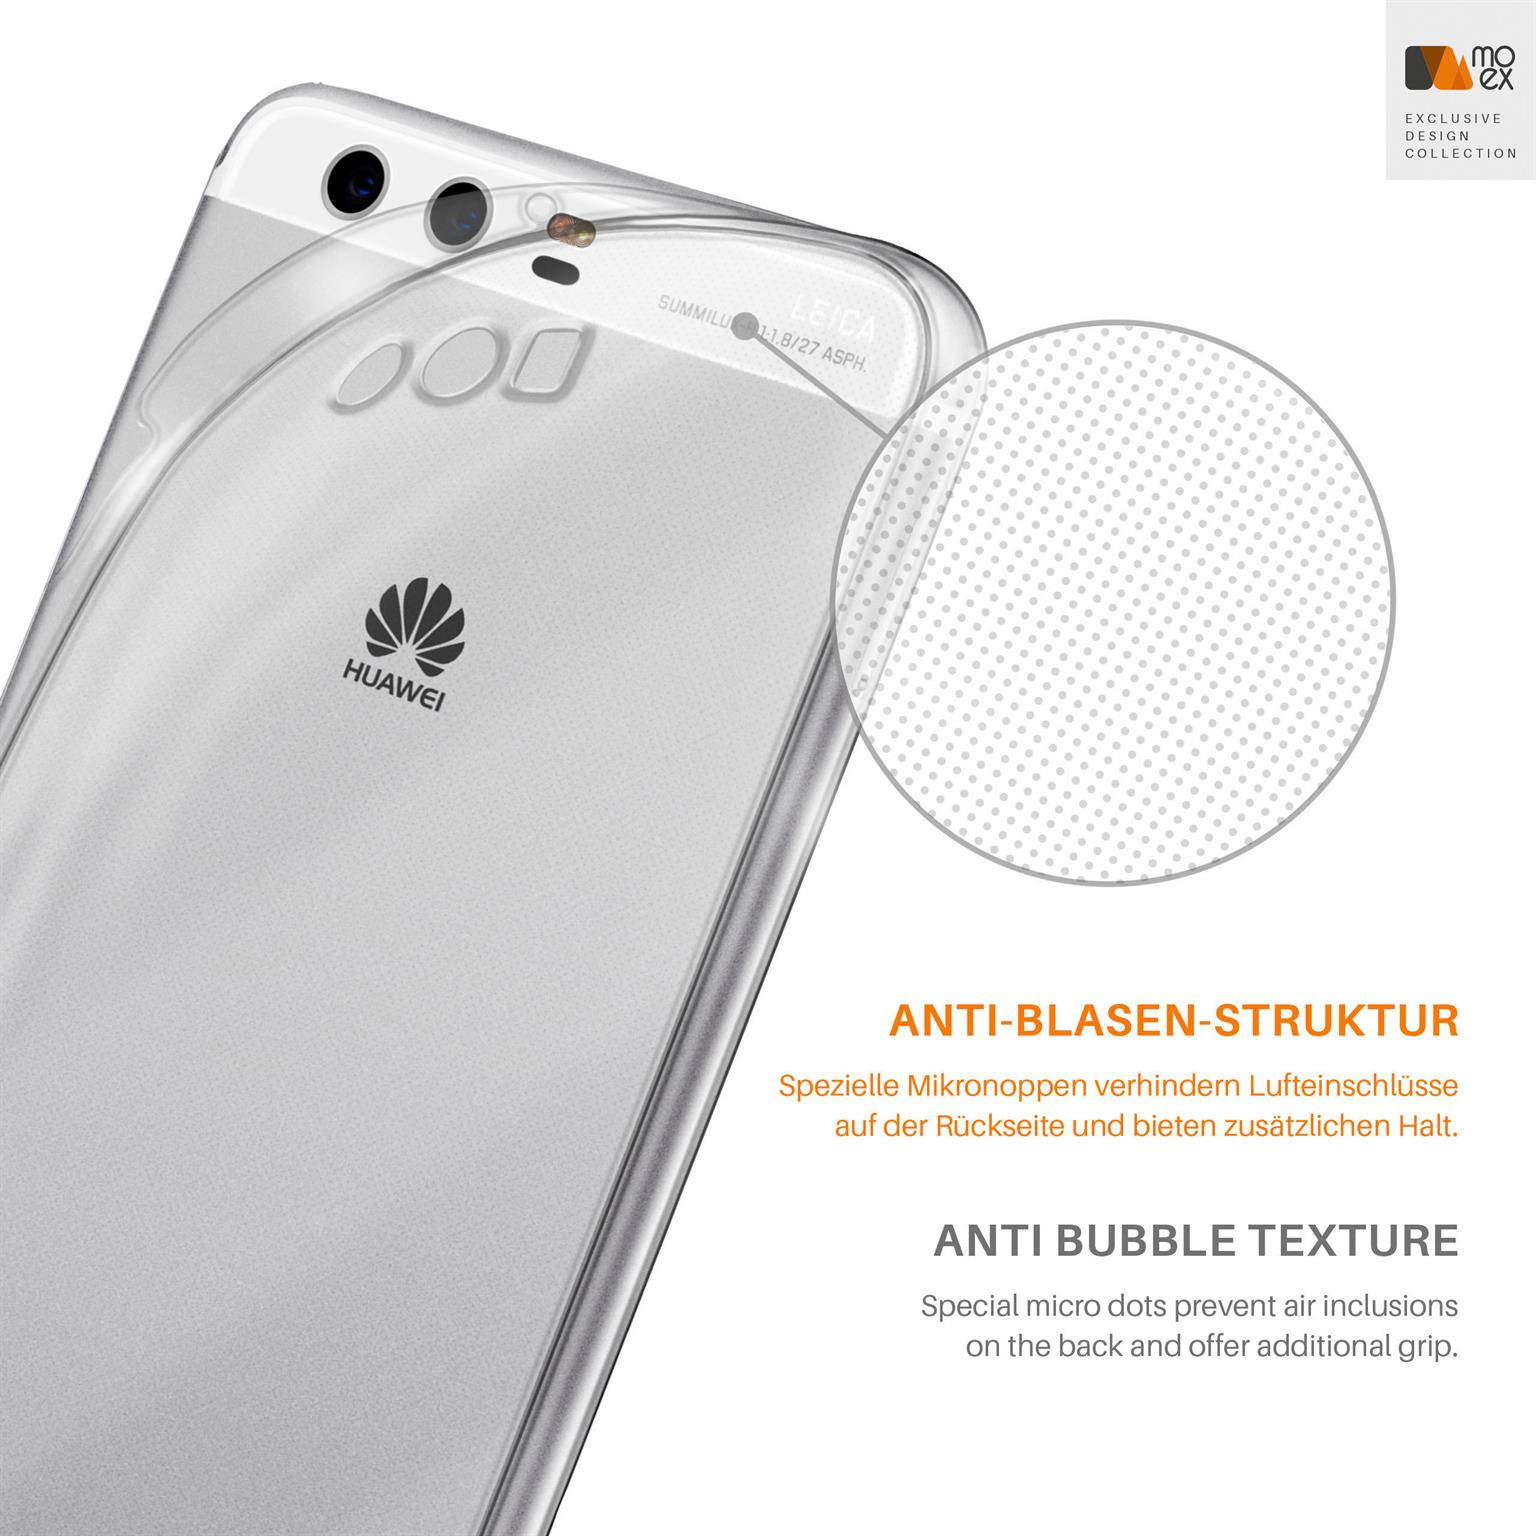 MOEX Aero Case, Backcover, Huawei, Crystal-Clear P10